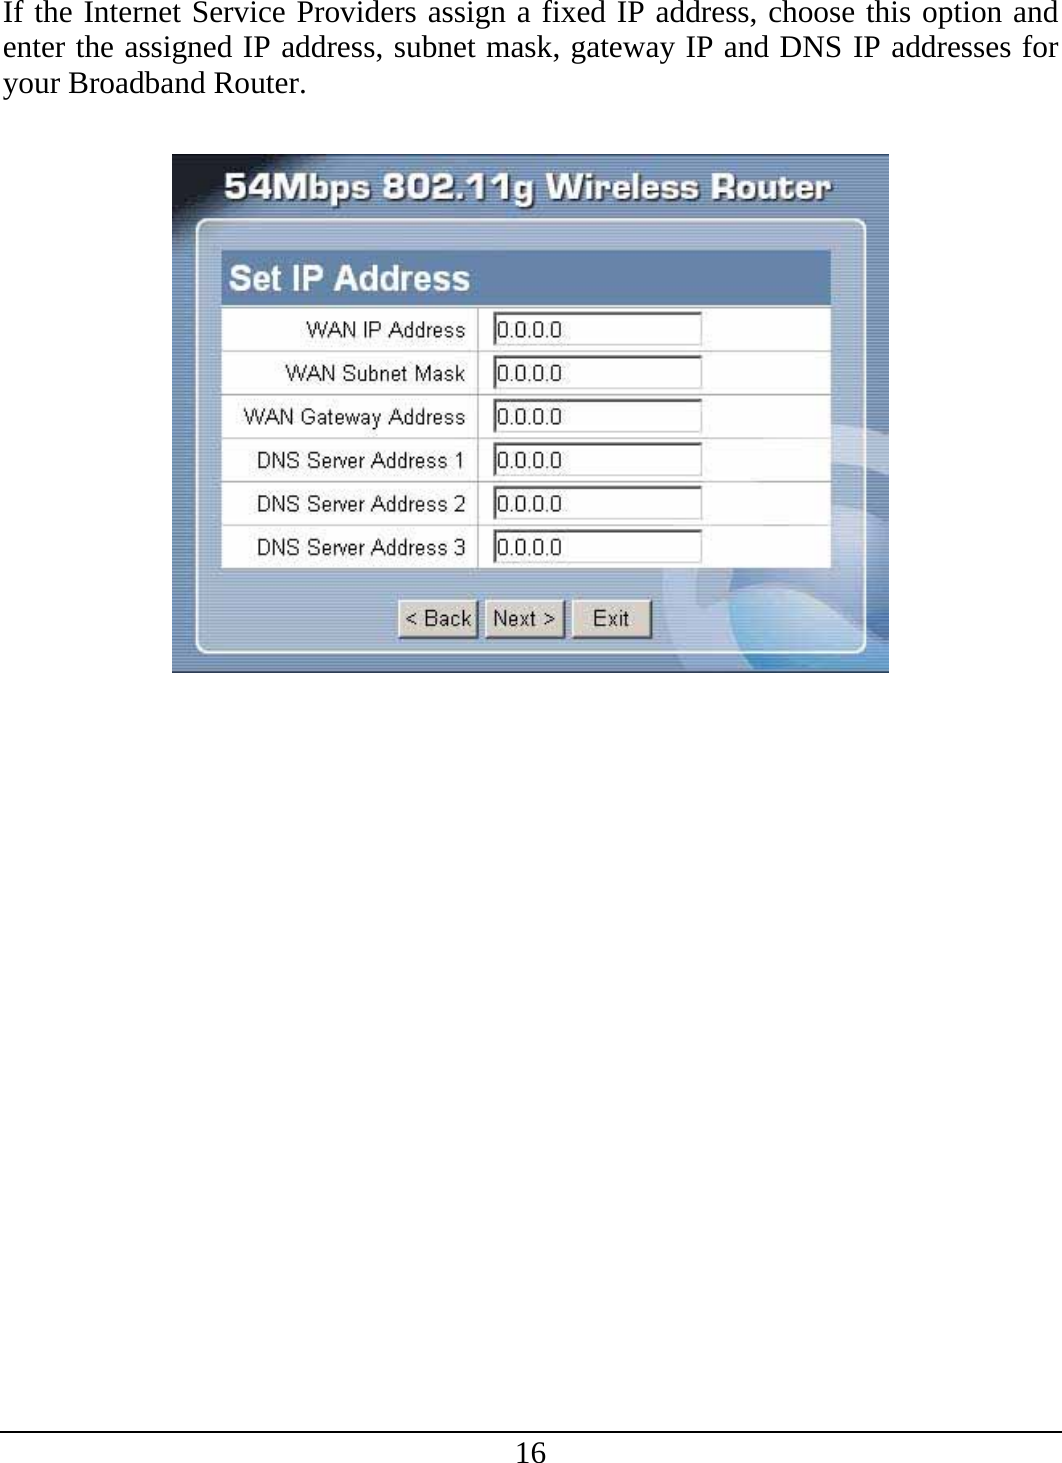 16 If the Internet Service Providers assign a fixed IP address, choose this option and enter the assigned IP address, subnet mask, gateway IP and DNS IP addresses for your Broadband Router.    